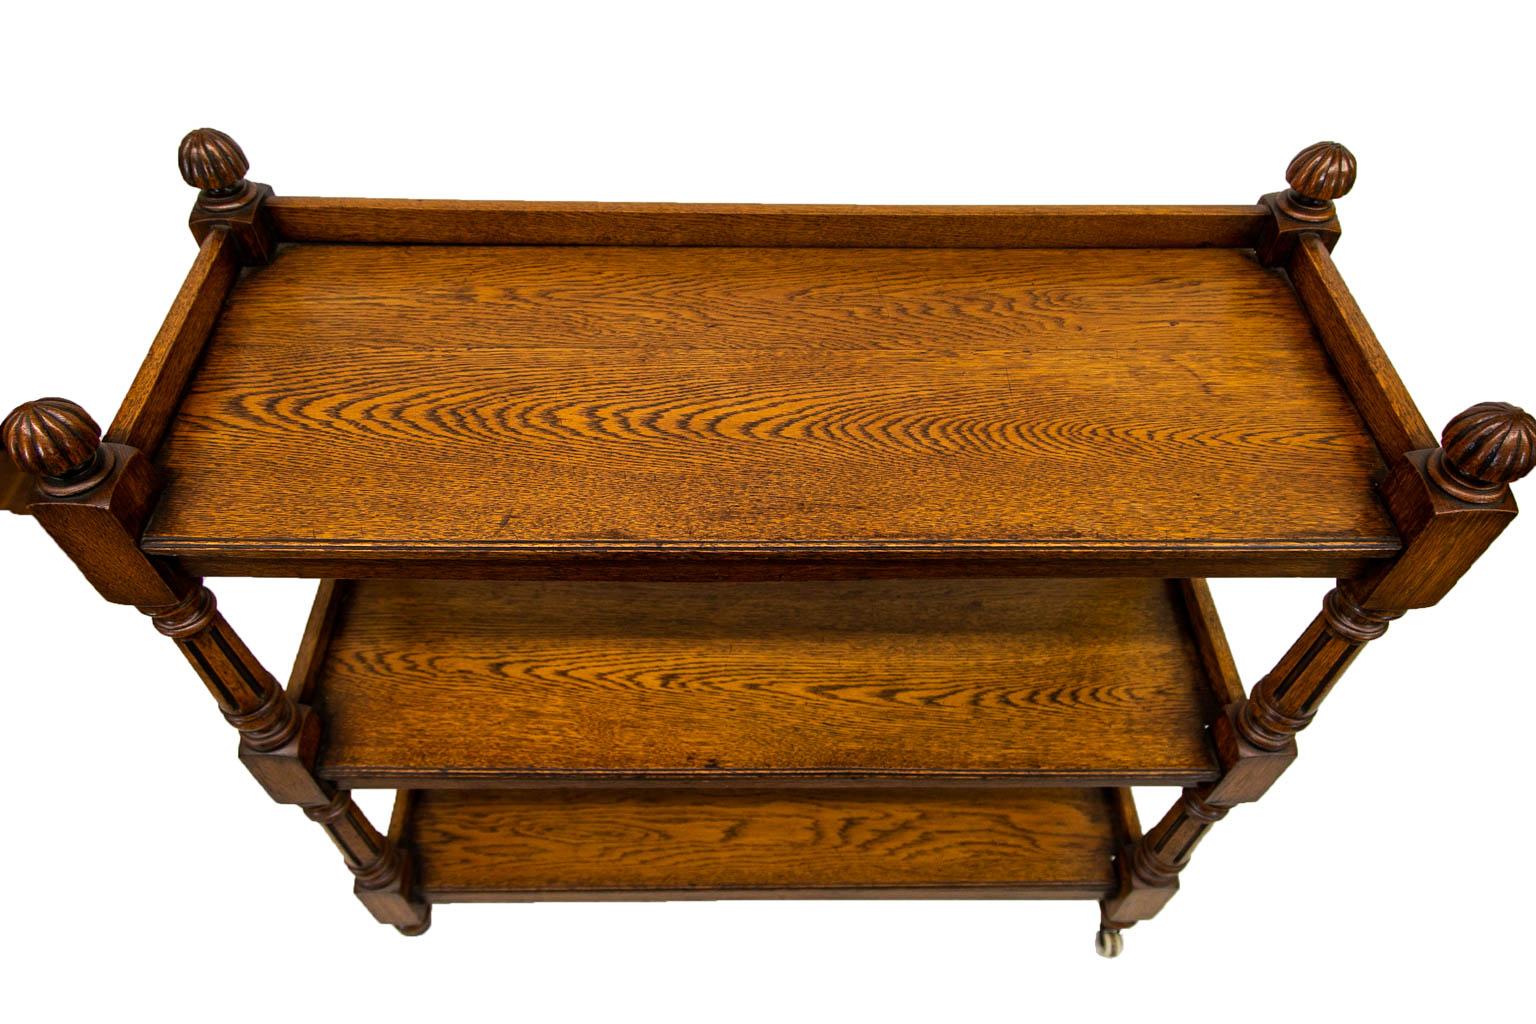 The three tiers of this server have galleries on the back and sides. The front edge of each shelf has a carved beaded molding. The top has four reeded mushroom finials. The shelf supports are turned and fluted. The lower legs terminate in the